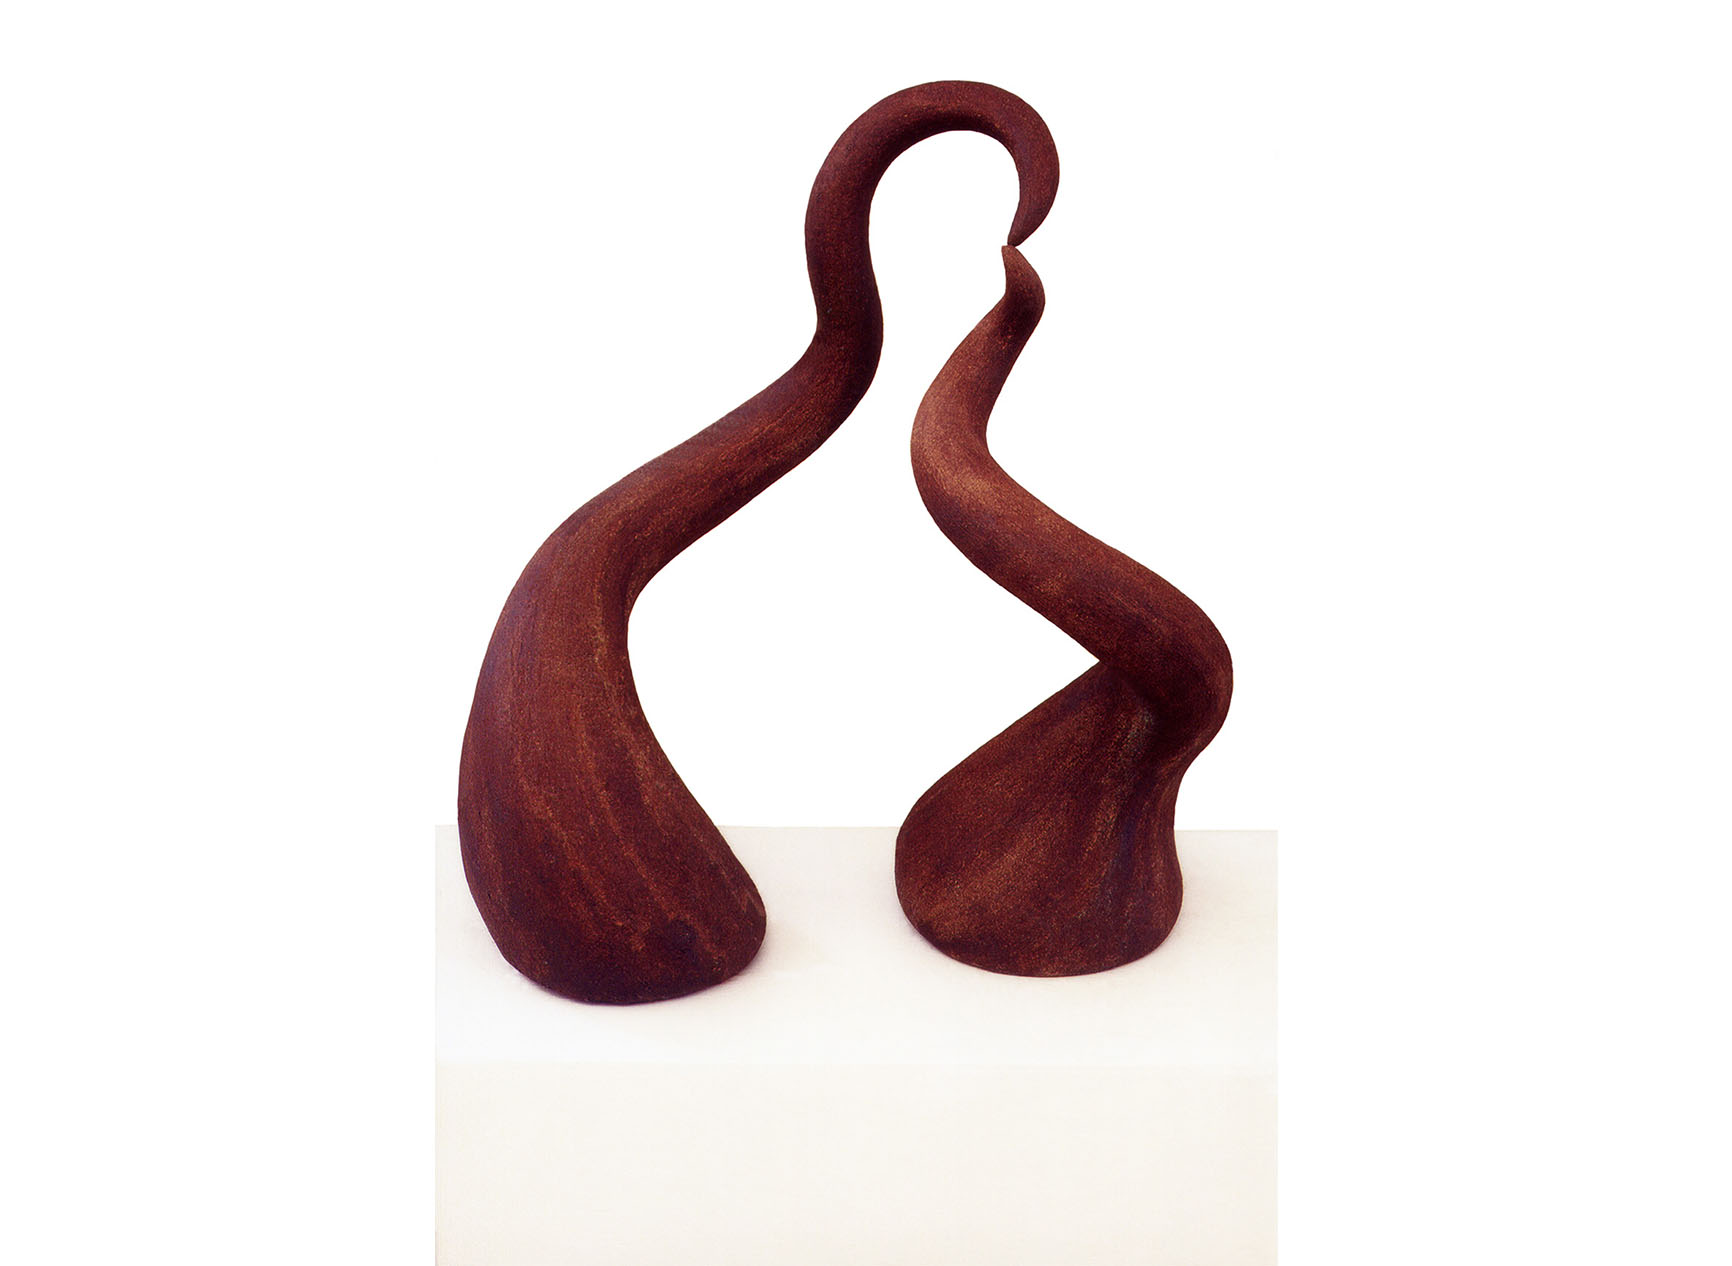 Two twisting clay sculptures, meeting together, called The Meeting